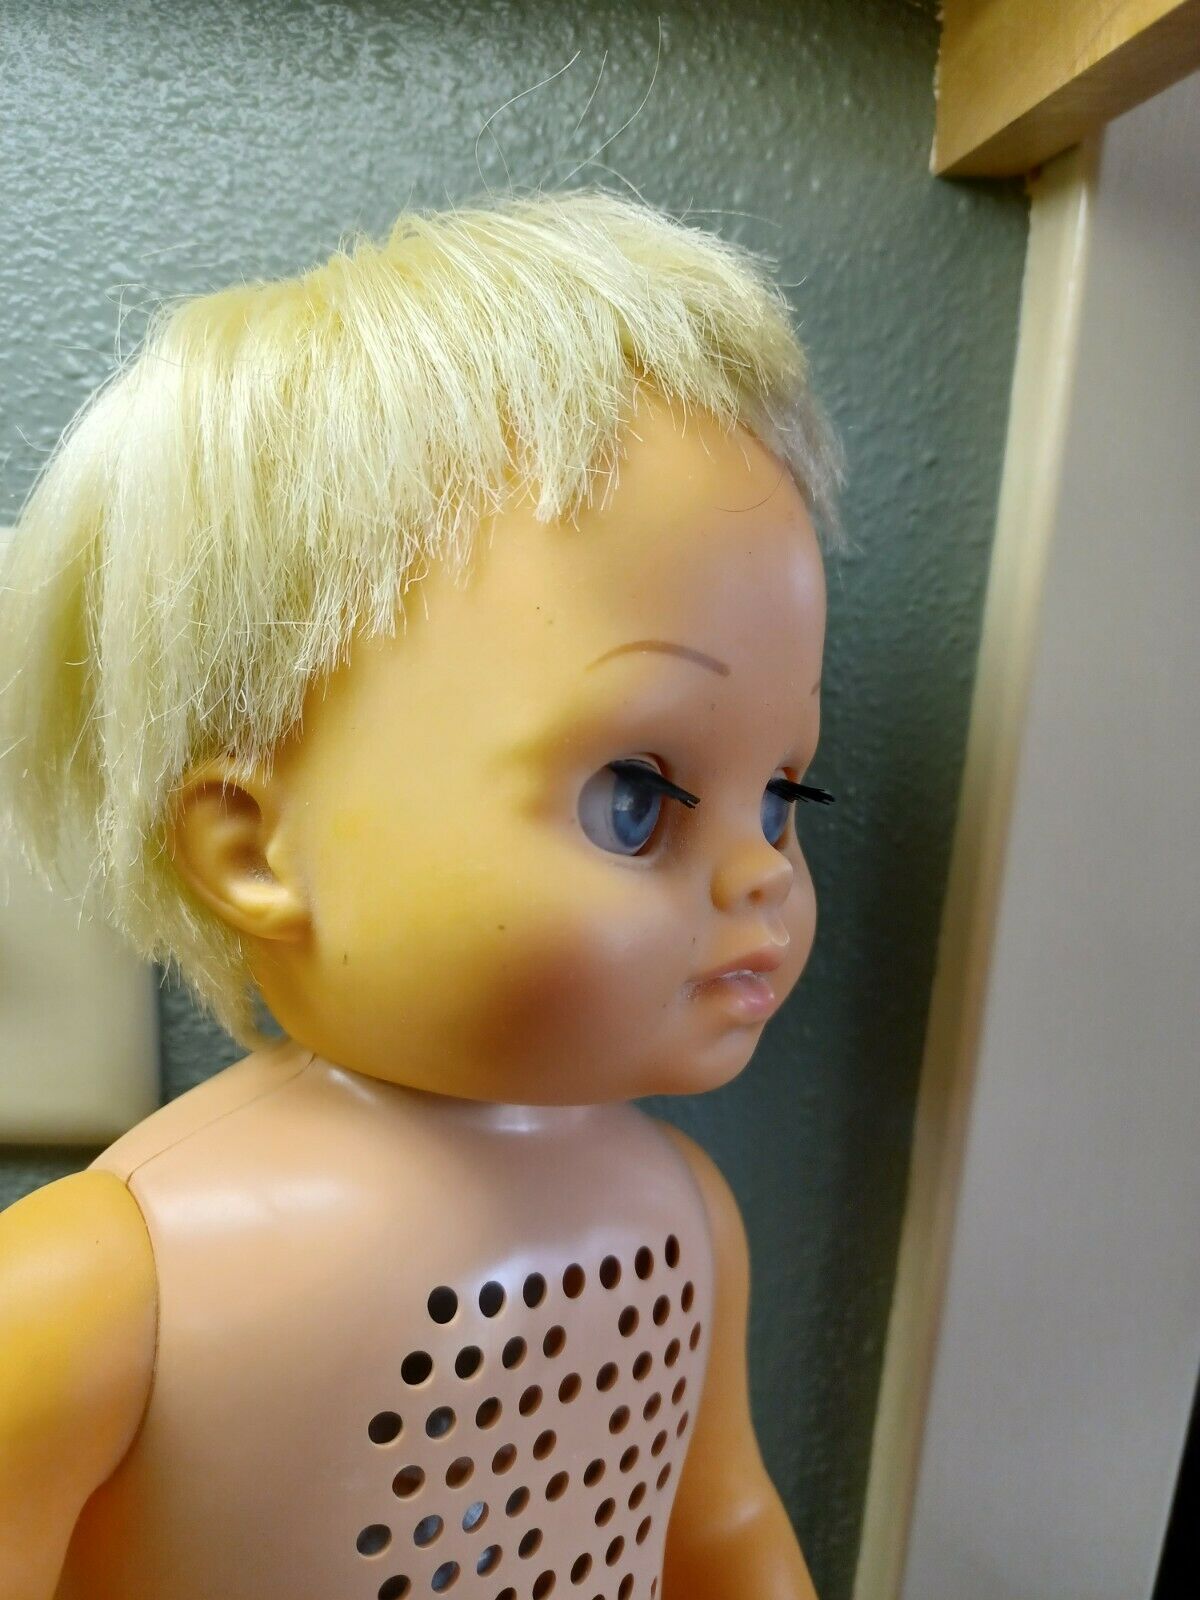 Vintage Baby Doll Mattel Tiny Chatty Baby Blonde Hair Chatty Doll 1962